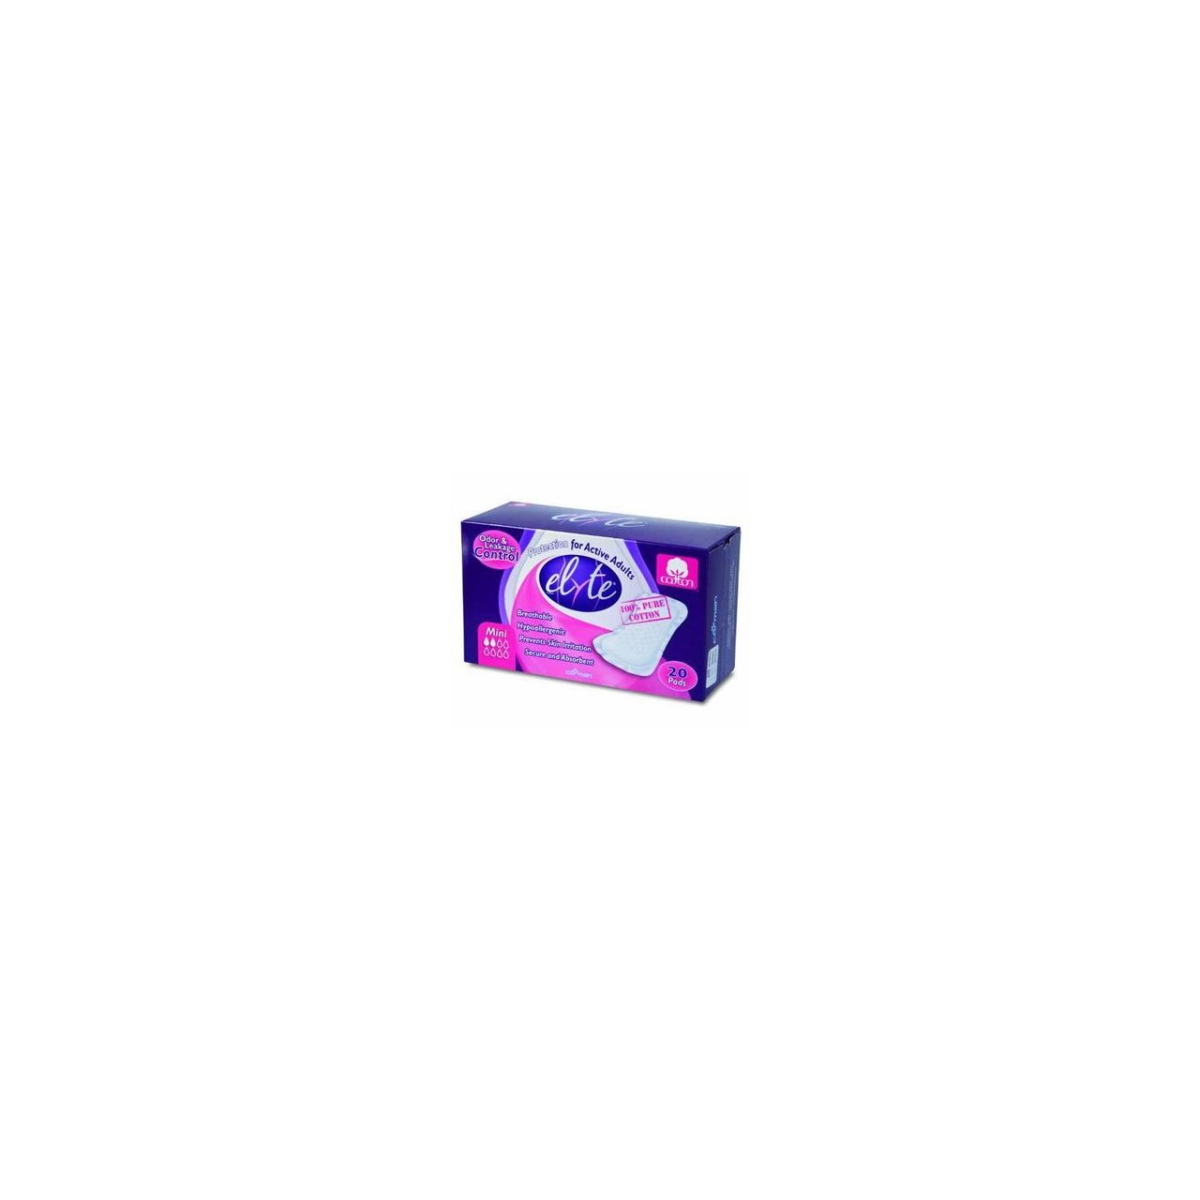 Hg0832600 4 X 8 In. Light Cotton Incontinence Pads - Mini, Pack Of 20